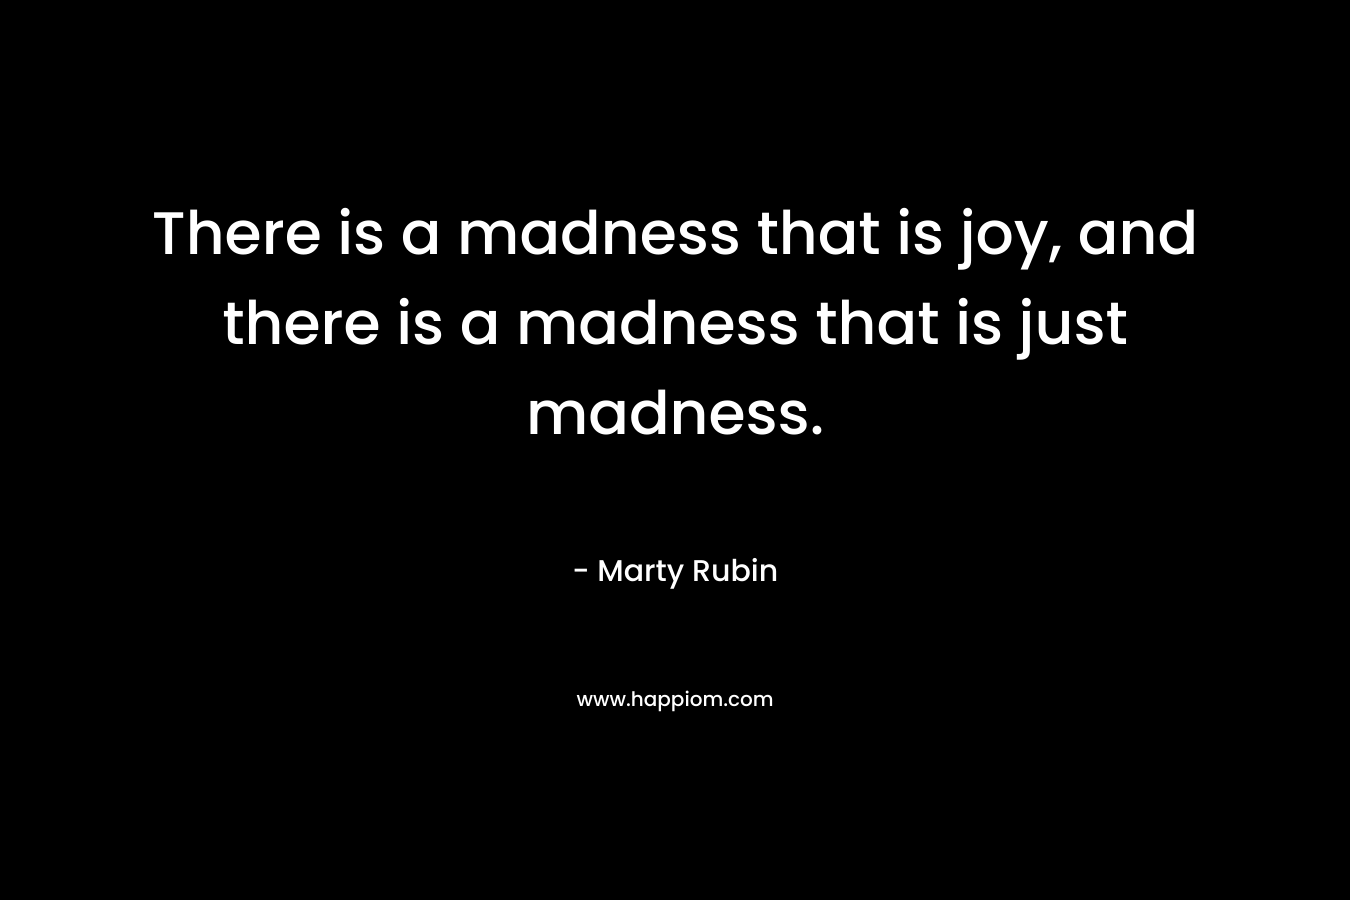 There is a madness that is joy, and there is a madness that is just madness.